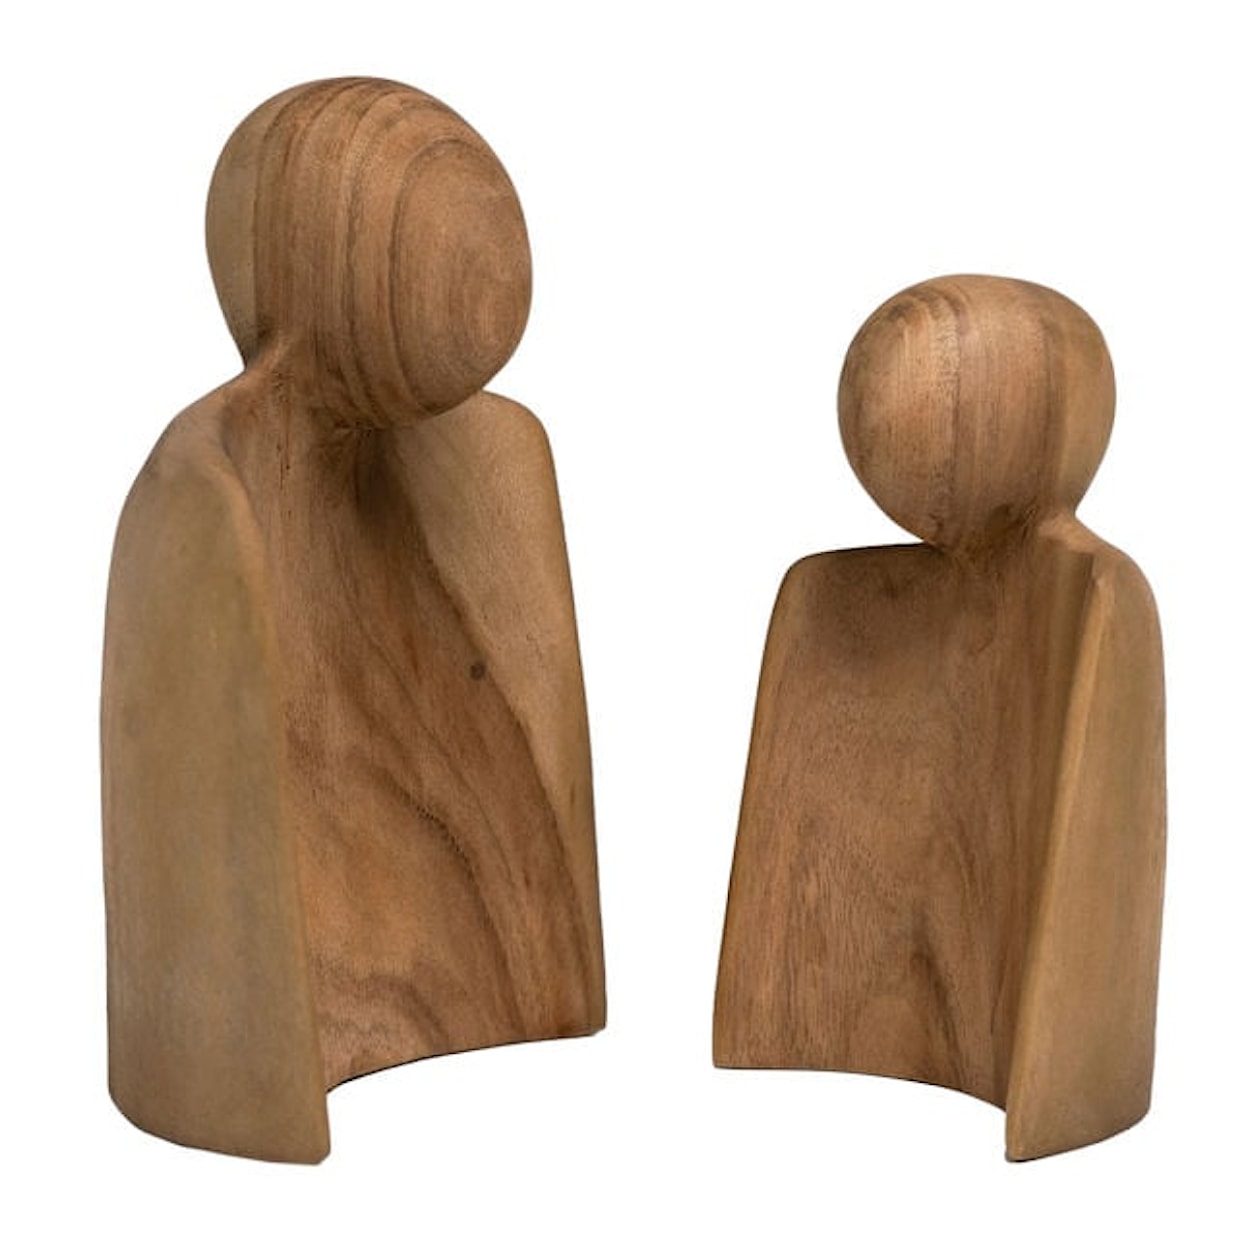 Dovetail Furniture Accessories WOOD SCULPTURE SET OF 2